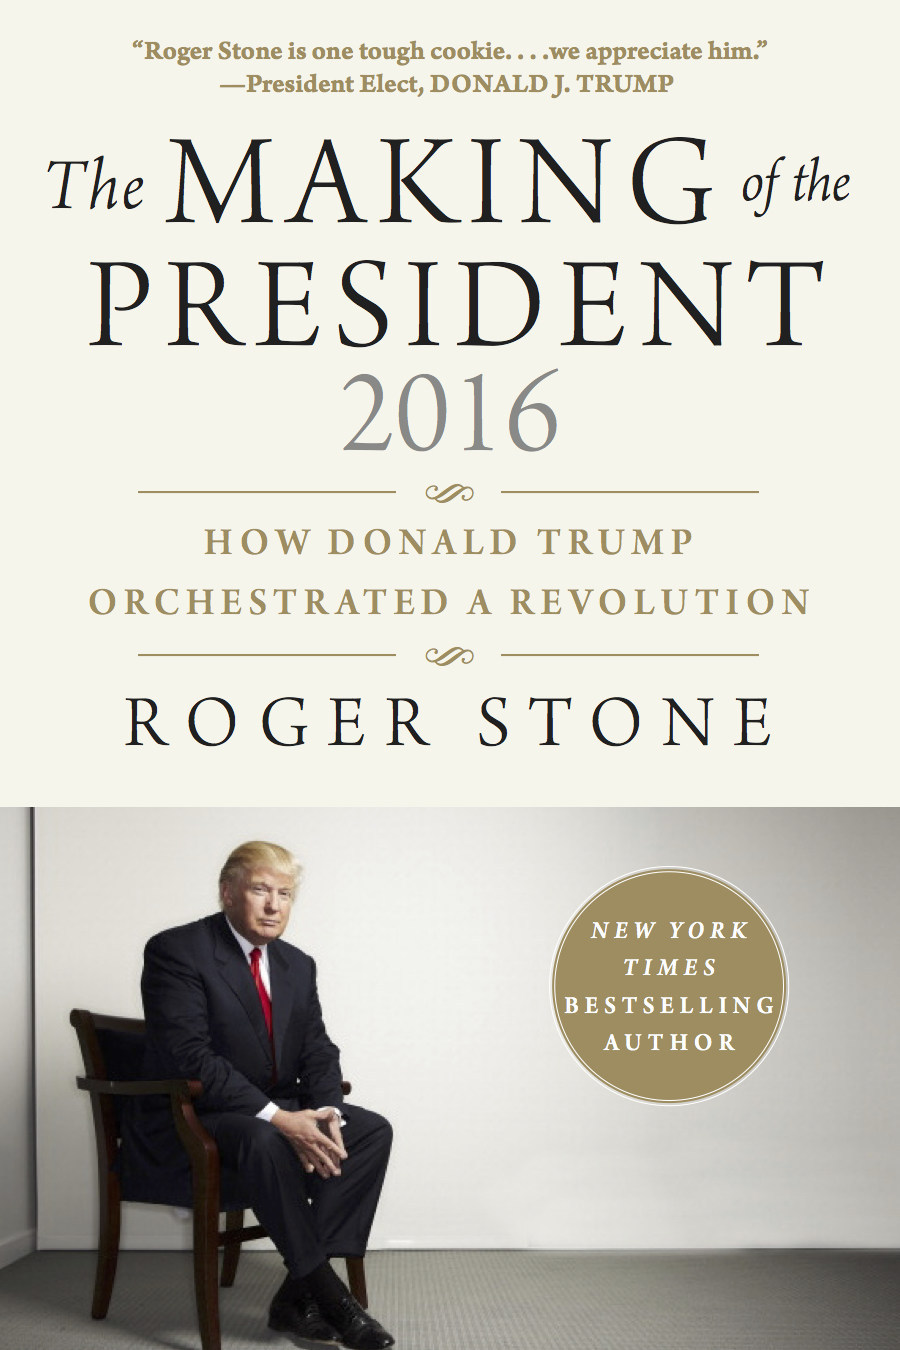 THE MAKING OF THE PRESIDENT 2016: How Donald Trump Orchestrated a Revolution by Roger Stone